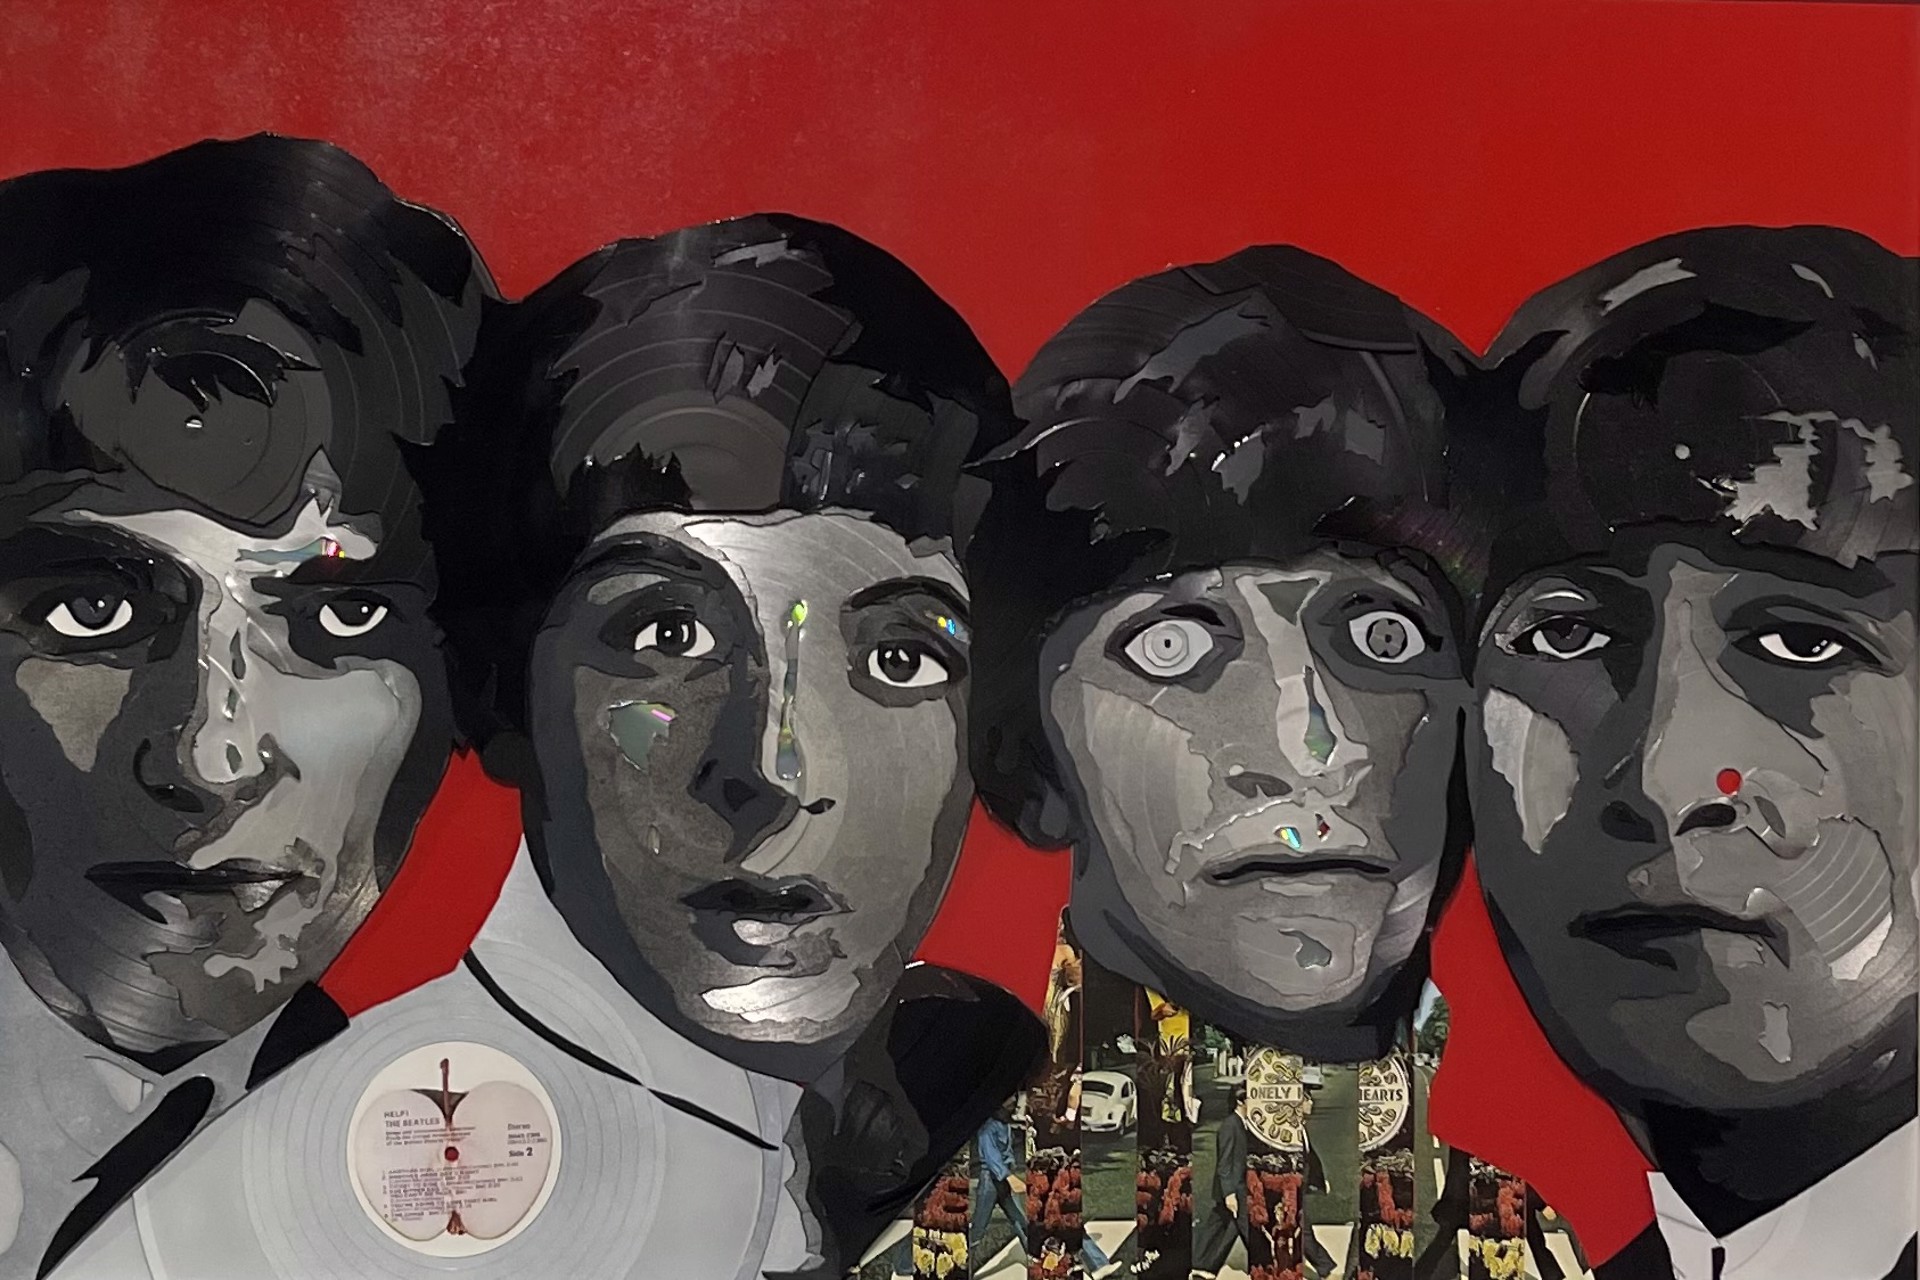 The Beatles by Michael Johnson (Mike J)